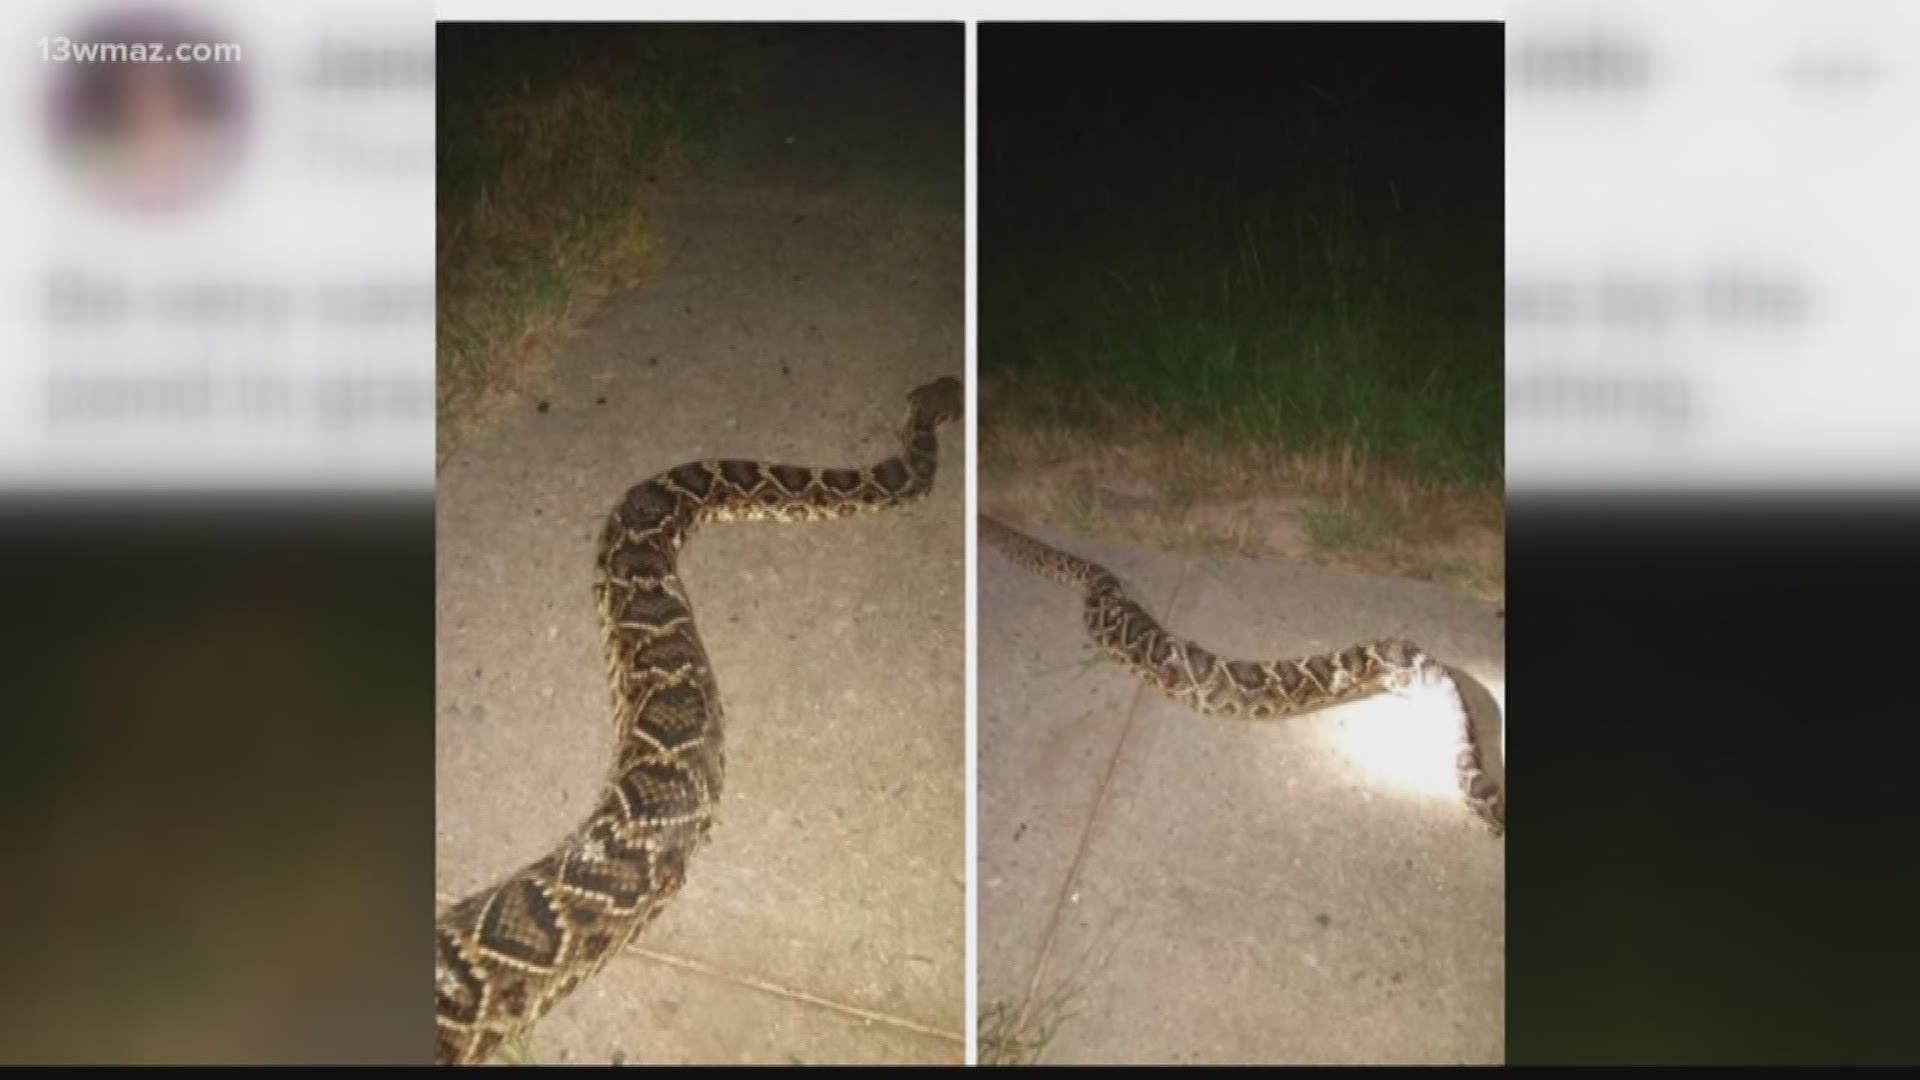 Some Laurens County folks spotted a large rattlesnake. Now, many on social media are worried it could harm their pets. Sabrina Burse spoke to the Department of Natural Resources to find out how dangerous those snakes are.